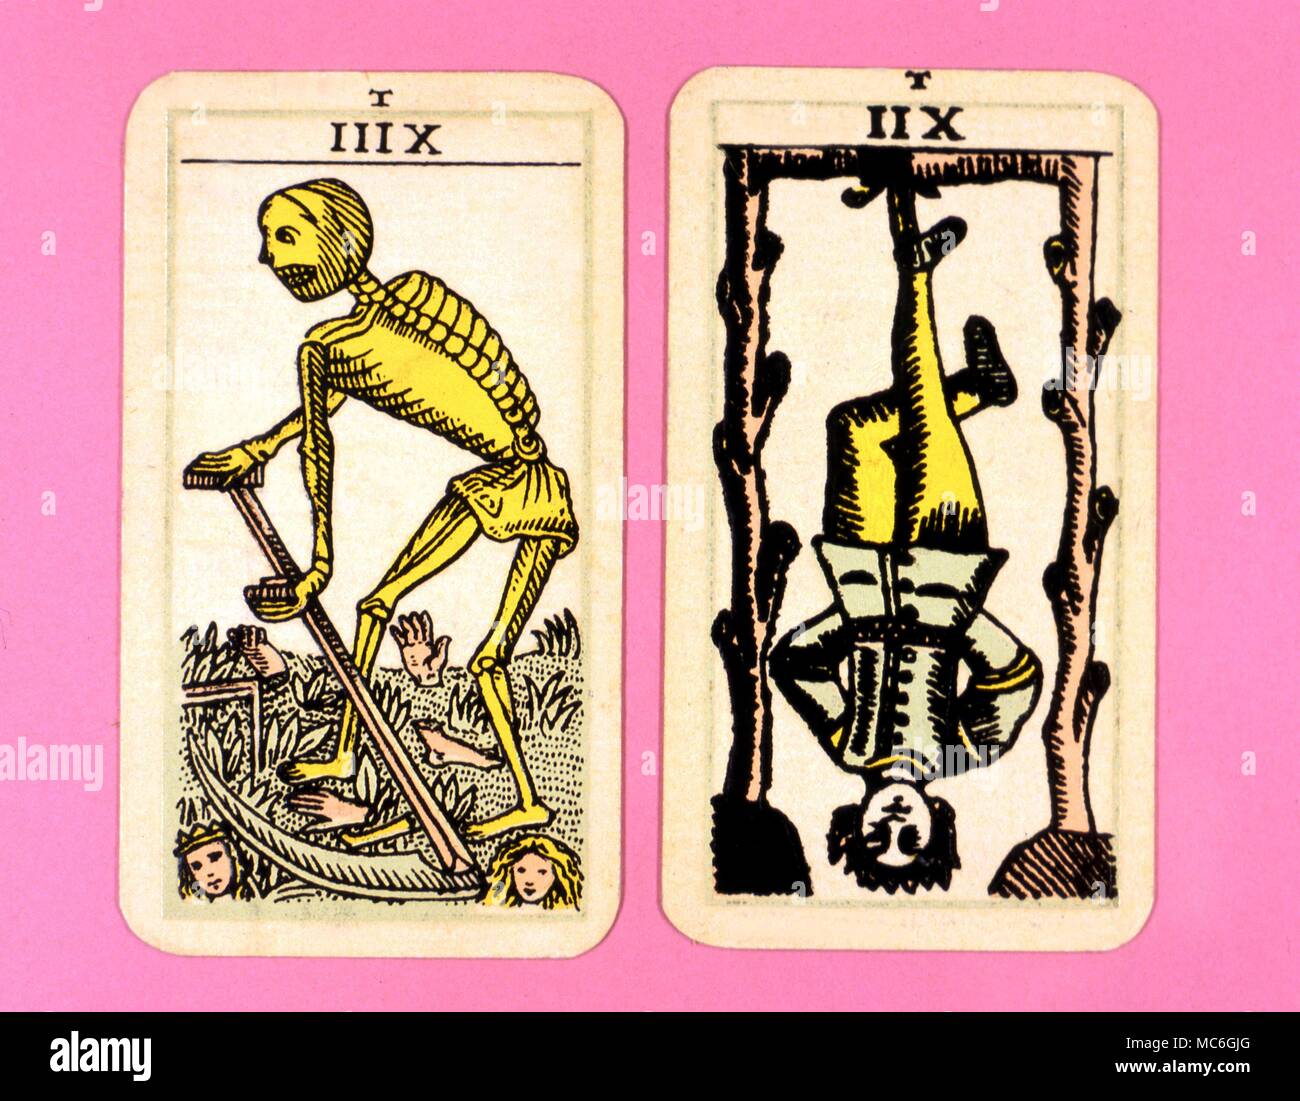 Tarot Cards-Majo Arcana- The Parisian Tarot. Card 12. The Hanging Man and Card 13. The Death Card. Two cards a Major Arcana picture Tarot, probably designed in an archaizing style in